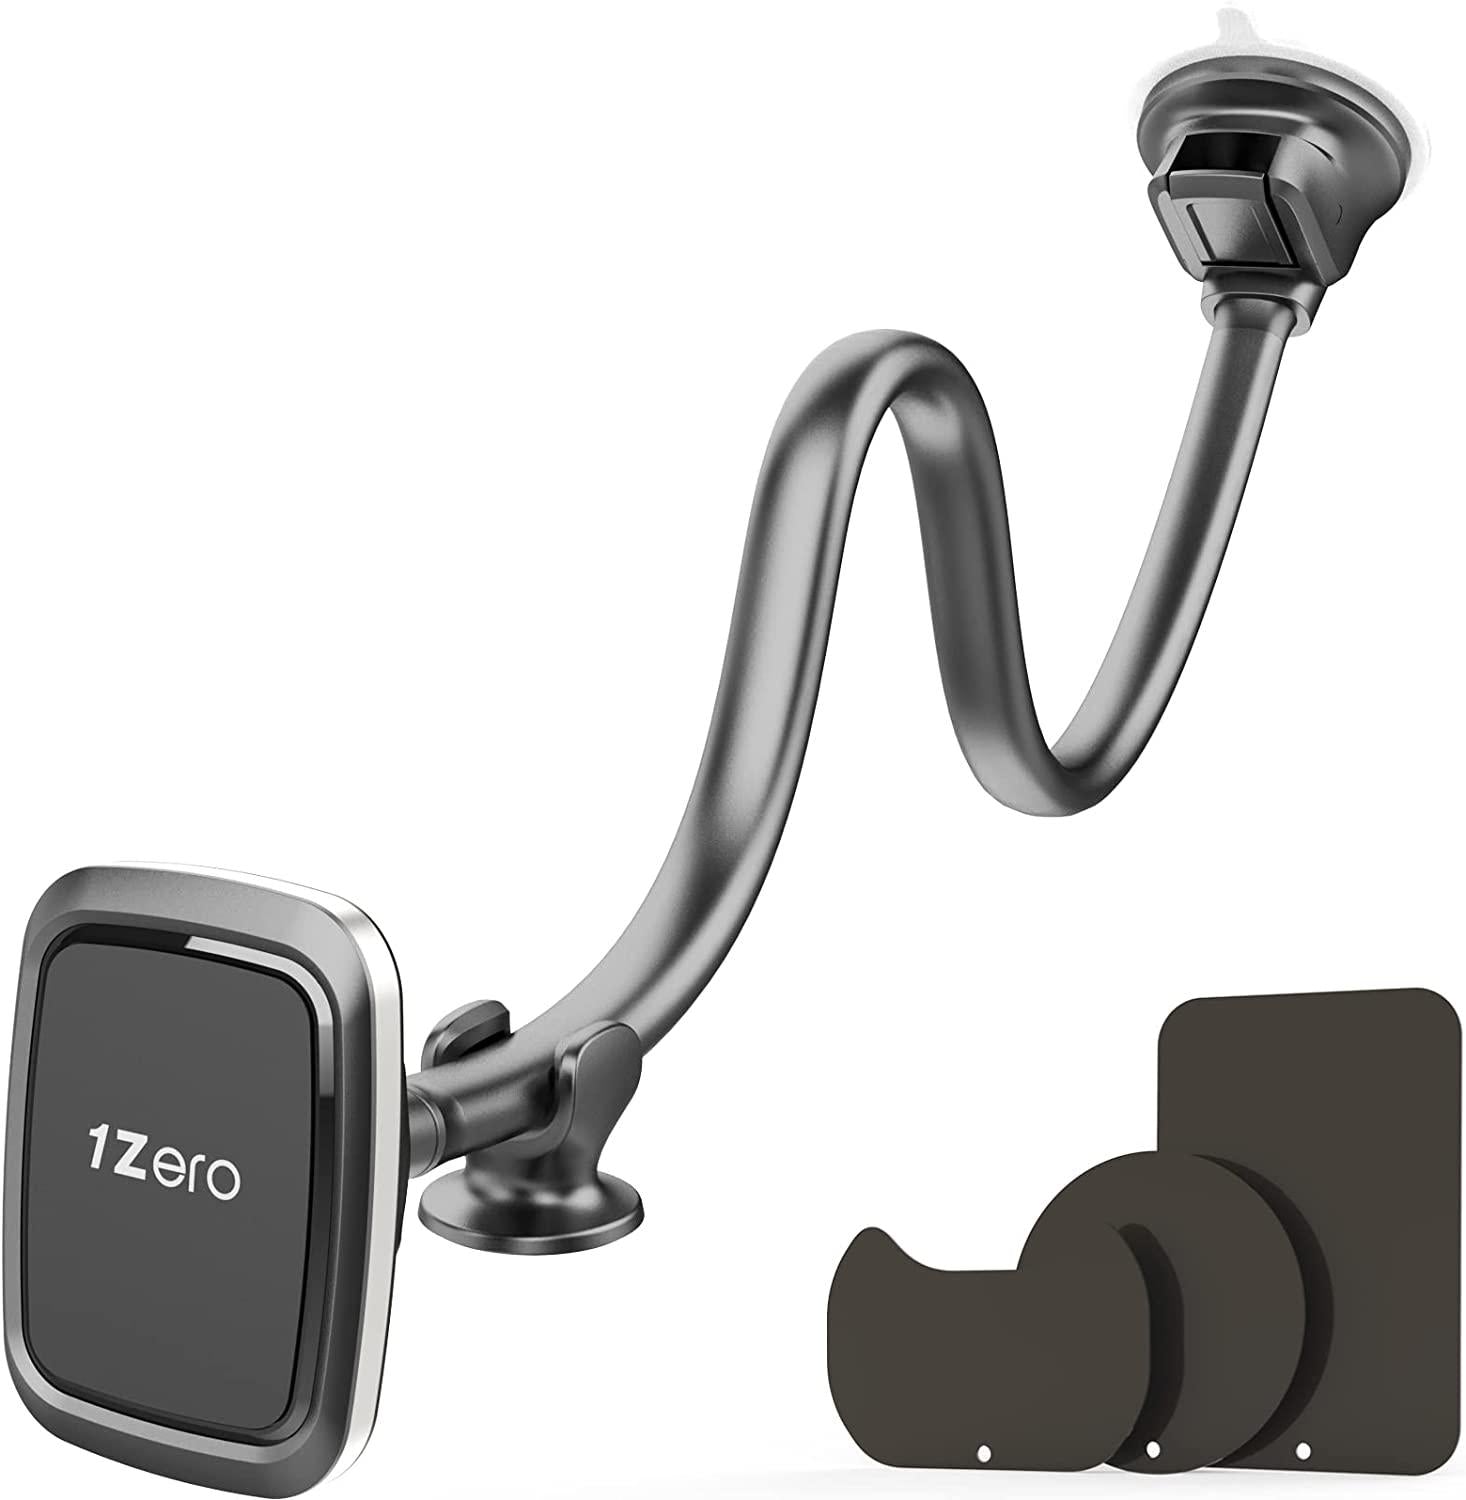 1Zero, Magnetic Car Truck Phone Mount with 13-Inch Gooseneck Extension Arm, Universal Windshield Dashboard Industrial-Strength Suction Cup Mobile Vehicle Holder for All Cell Phones iPhone by 1Zero